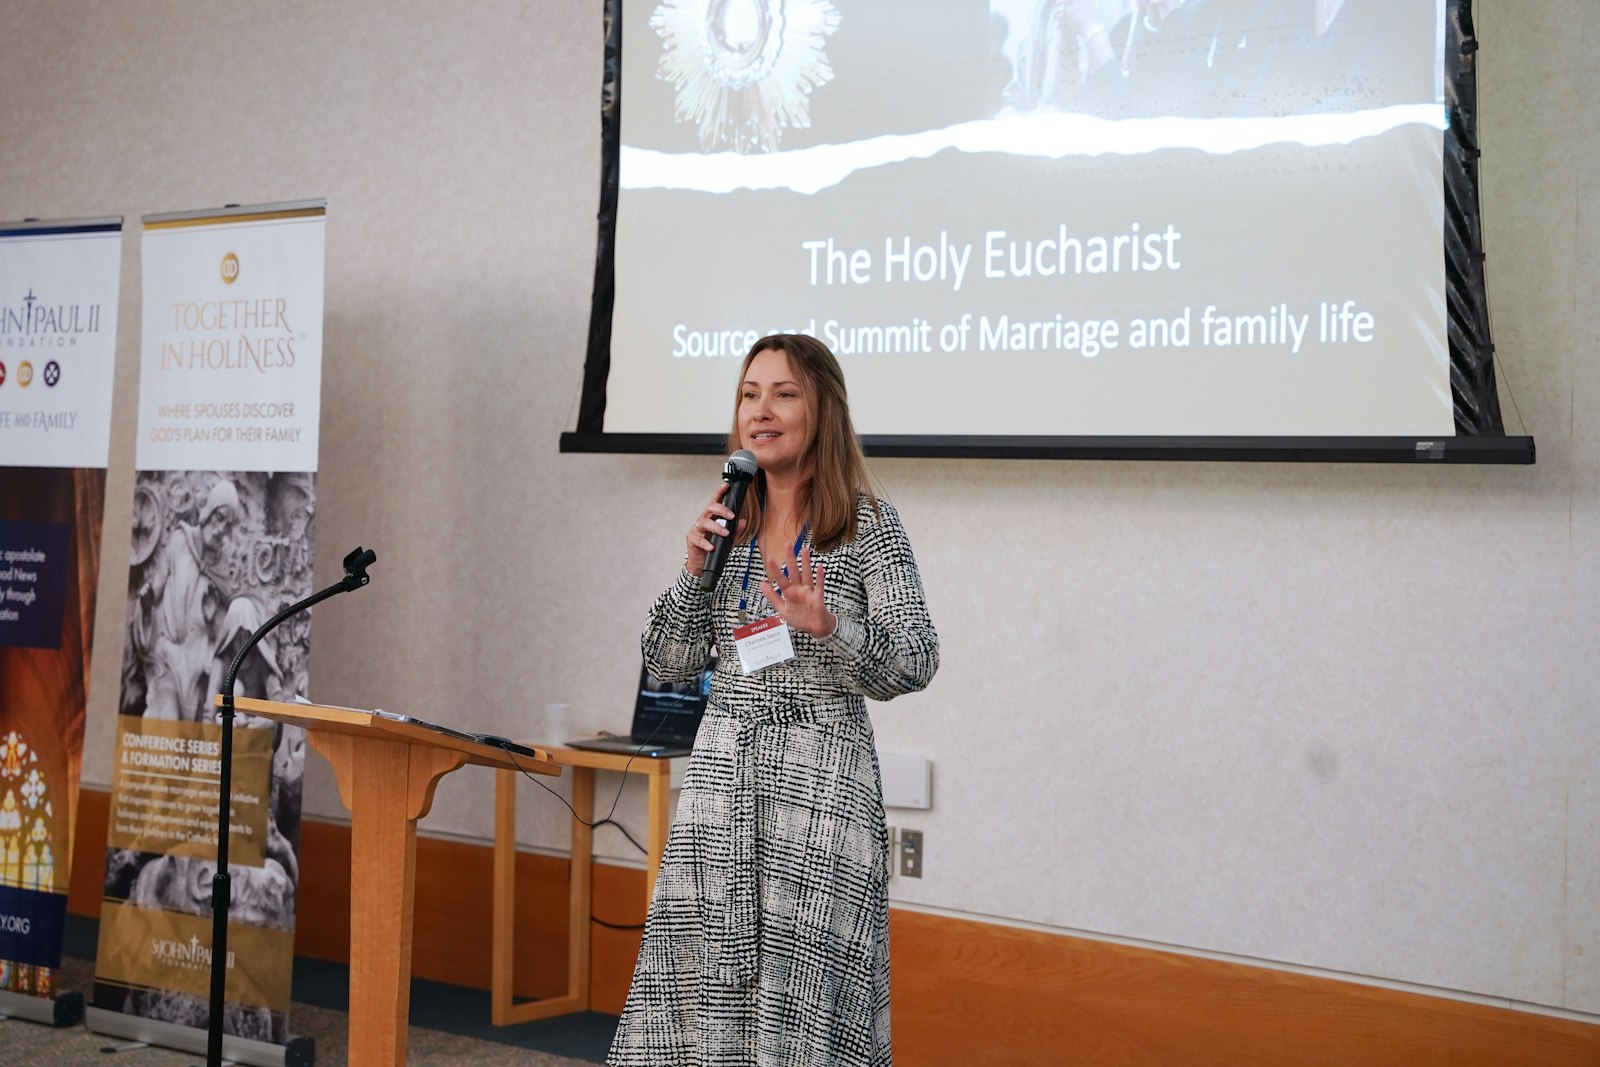 "How do we open our hearts to receive that love, so we are so filled with it that it spreads to our marriage, our family, our children, and into the world? That is our challenge,” Sacco said during her talk on the transforming power of the Eucharist.